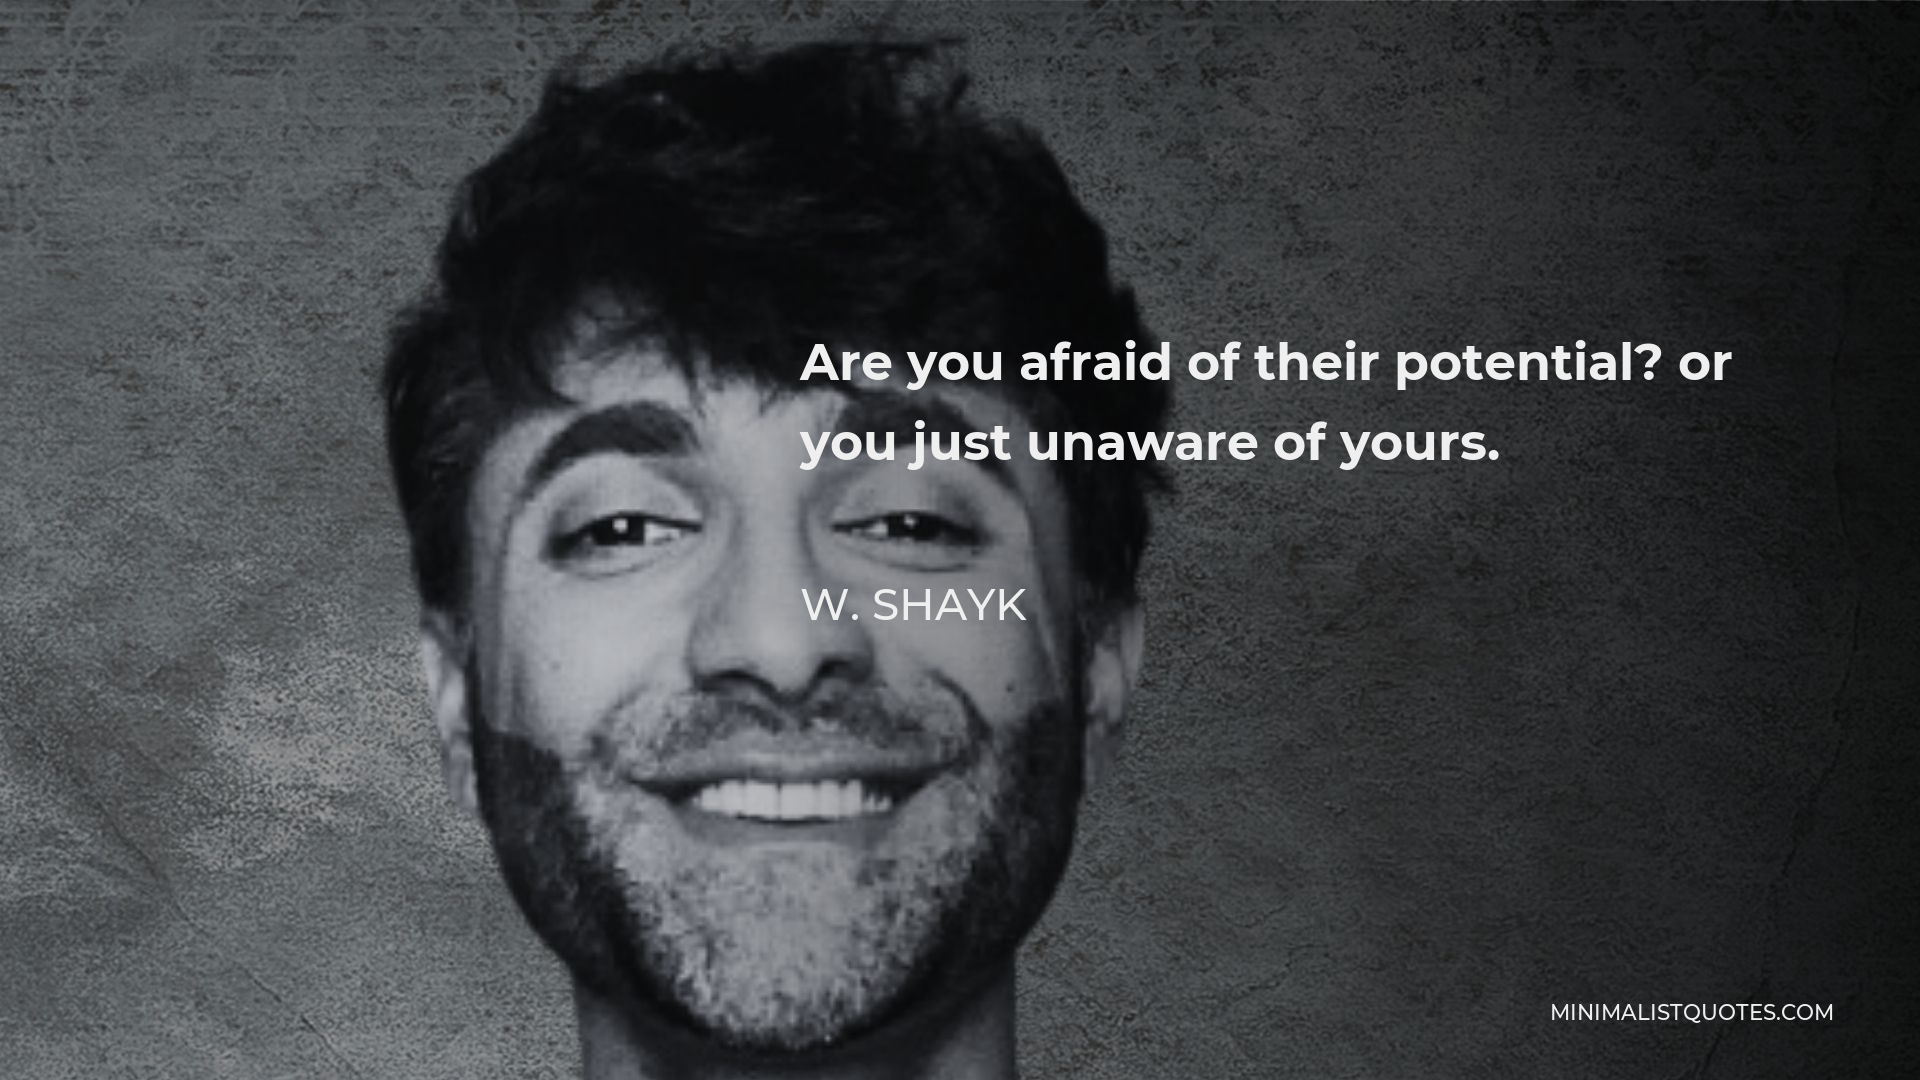 W. Shayk Quote - Are you afraid of their potential? or you just unaware of yours.